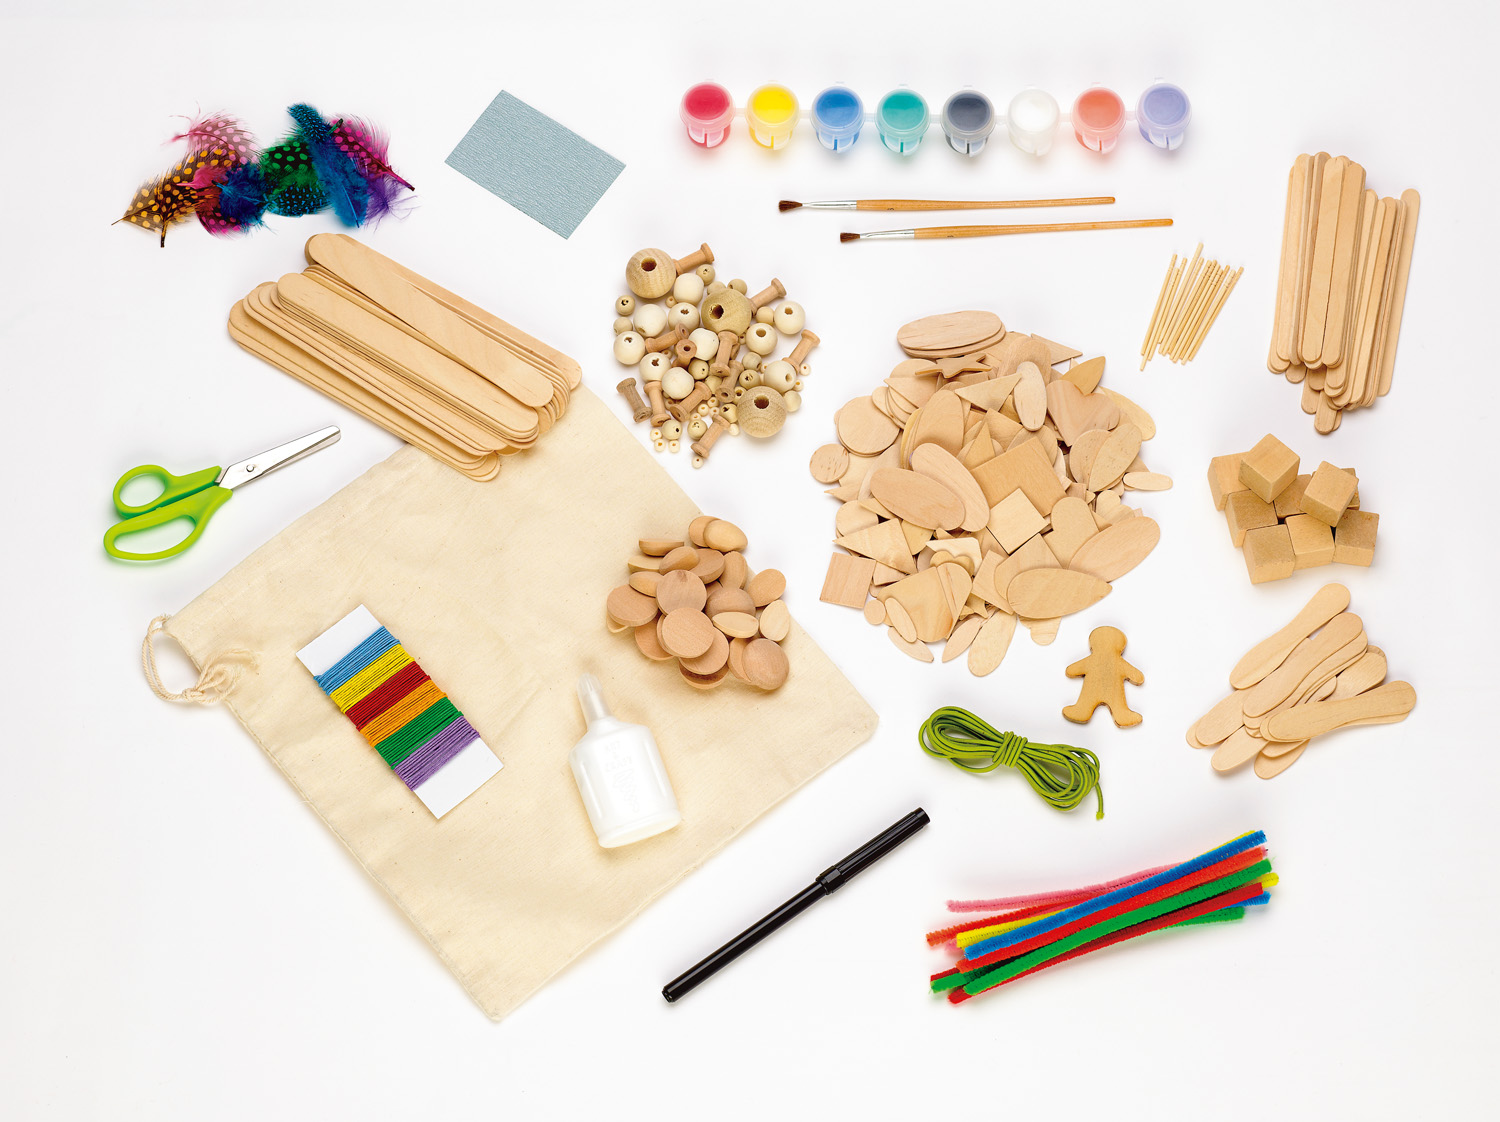 10 Best Art Kits For 5 Year Olds